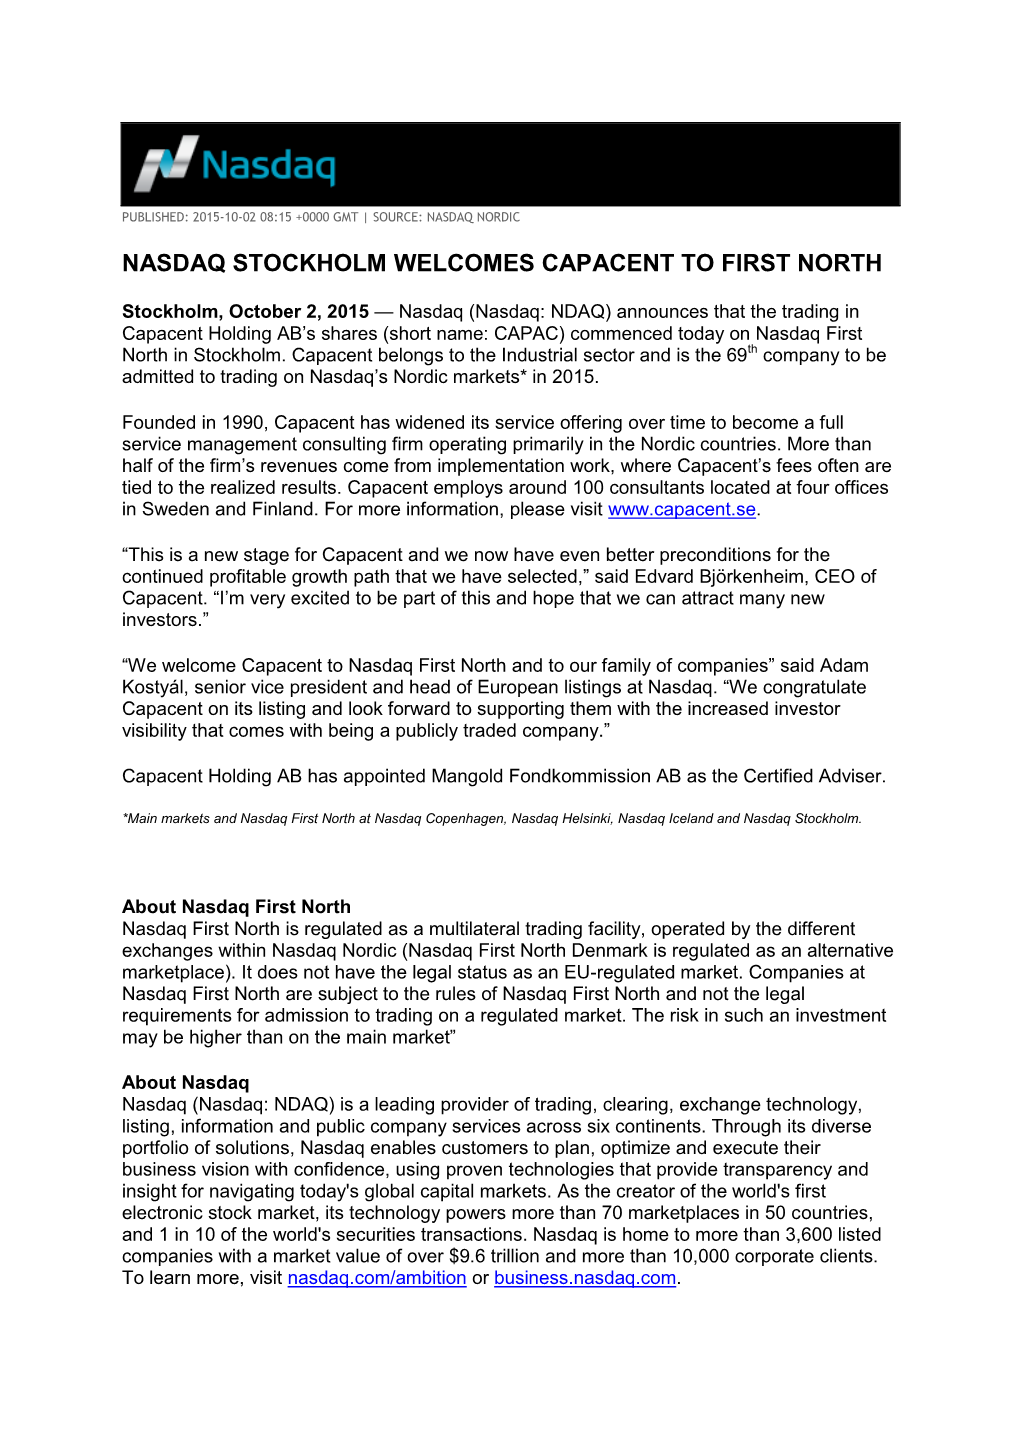 Nasdaq Stockholm Welcomes Capacent to First North